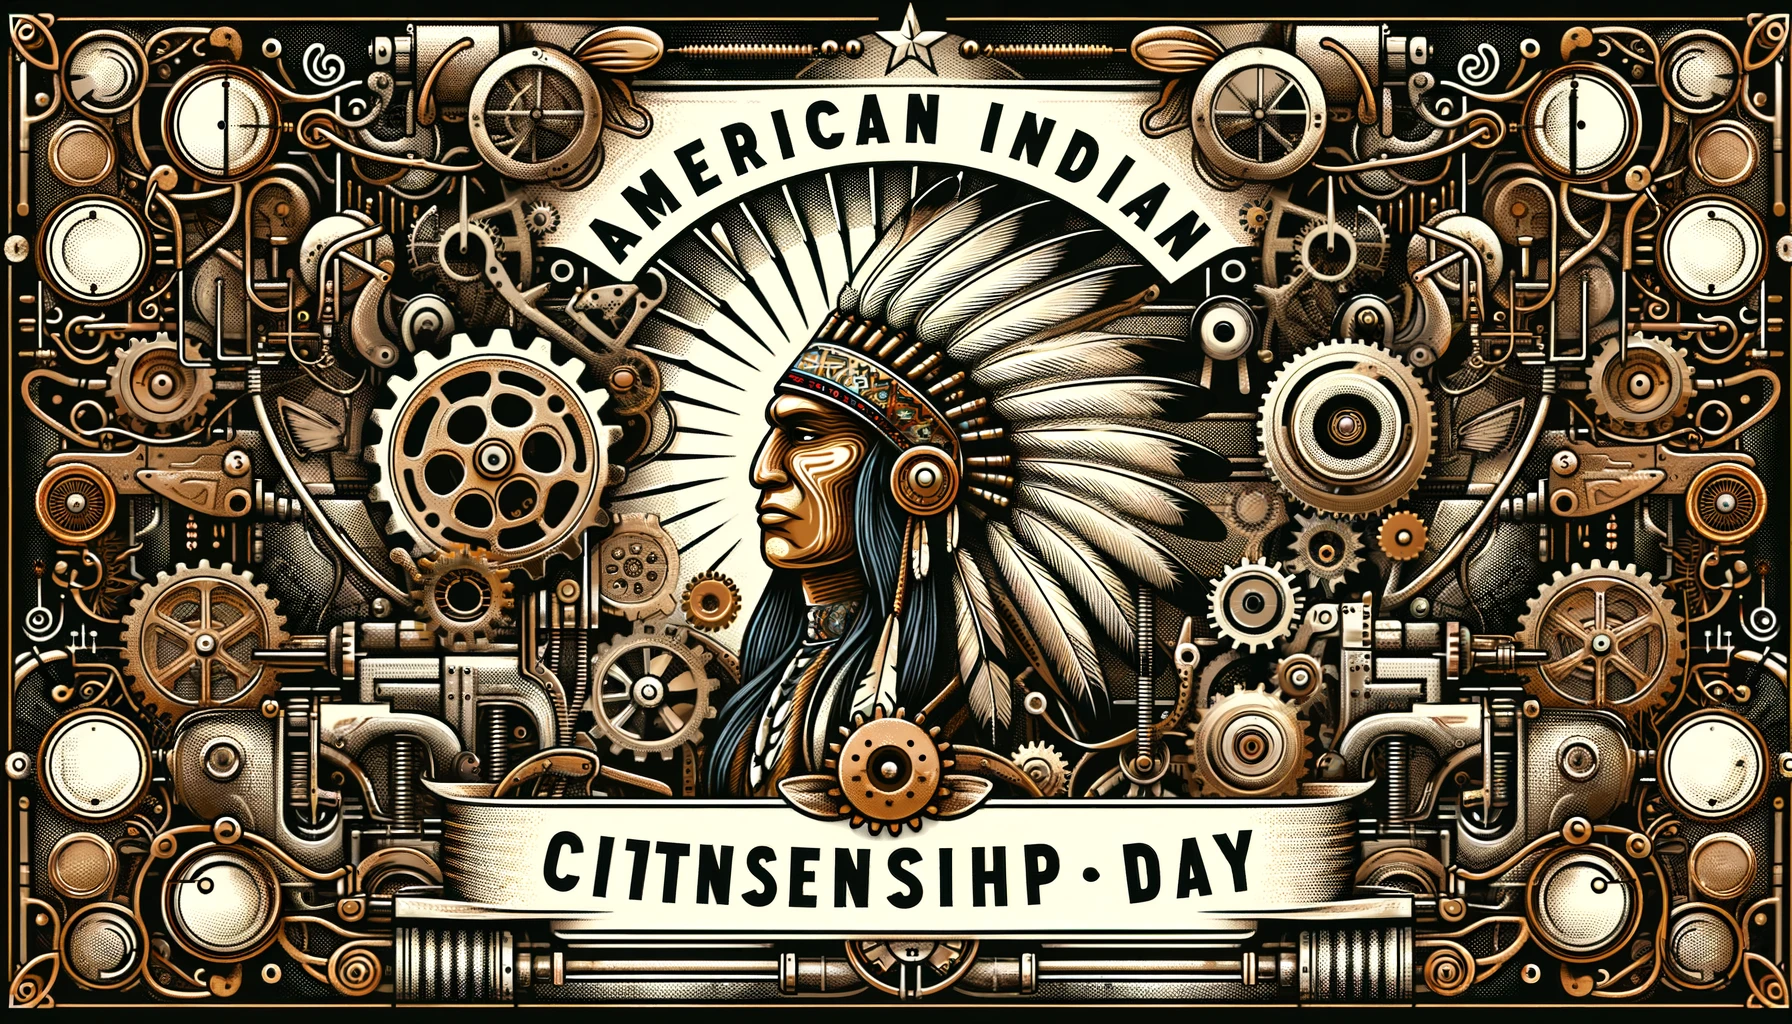 American Indian Citizenship Day